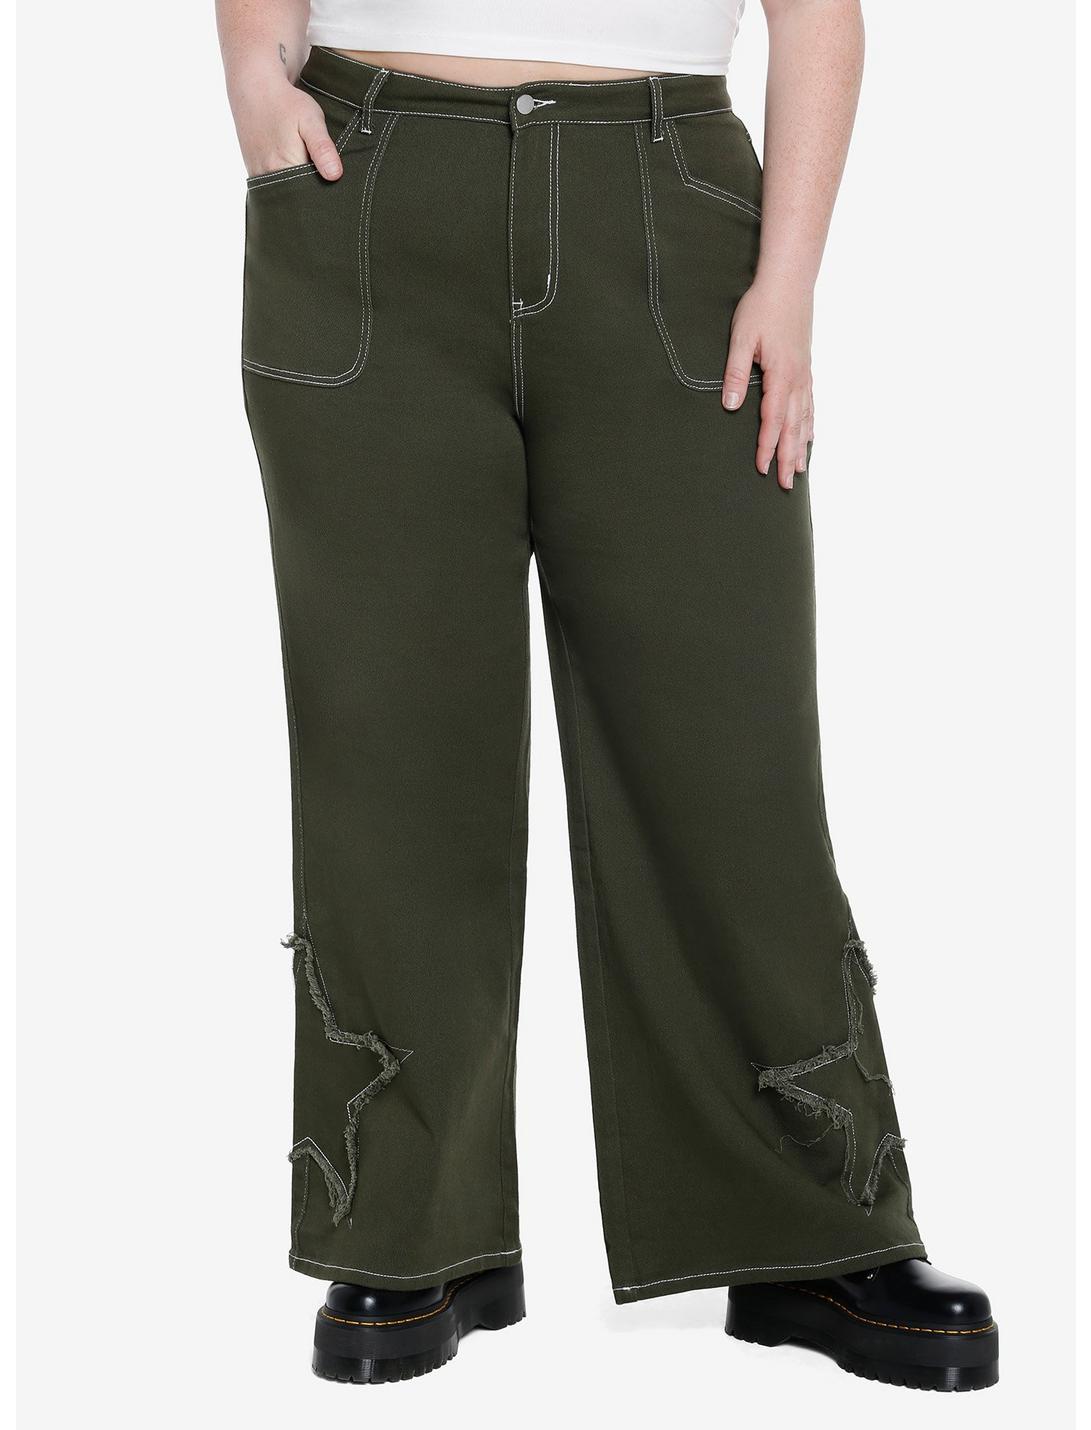 Green Star Patch Straight Leg Pants Plus Size, GREEN, hi-res